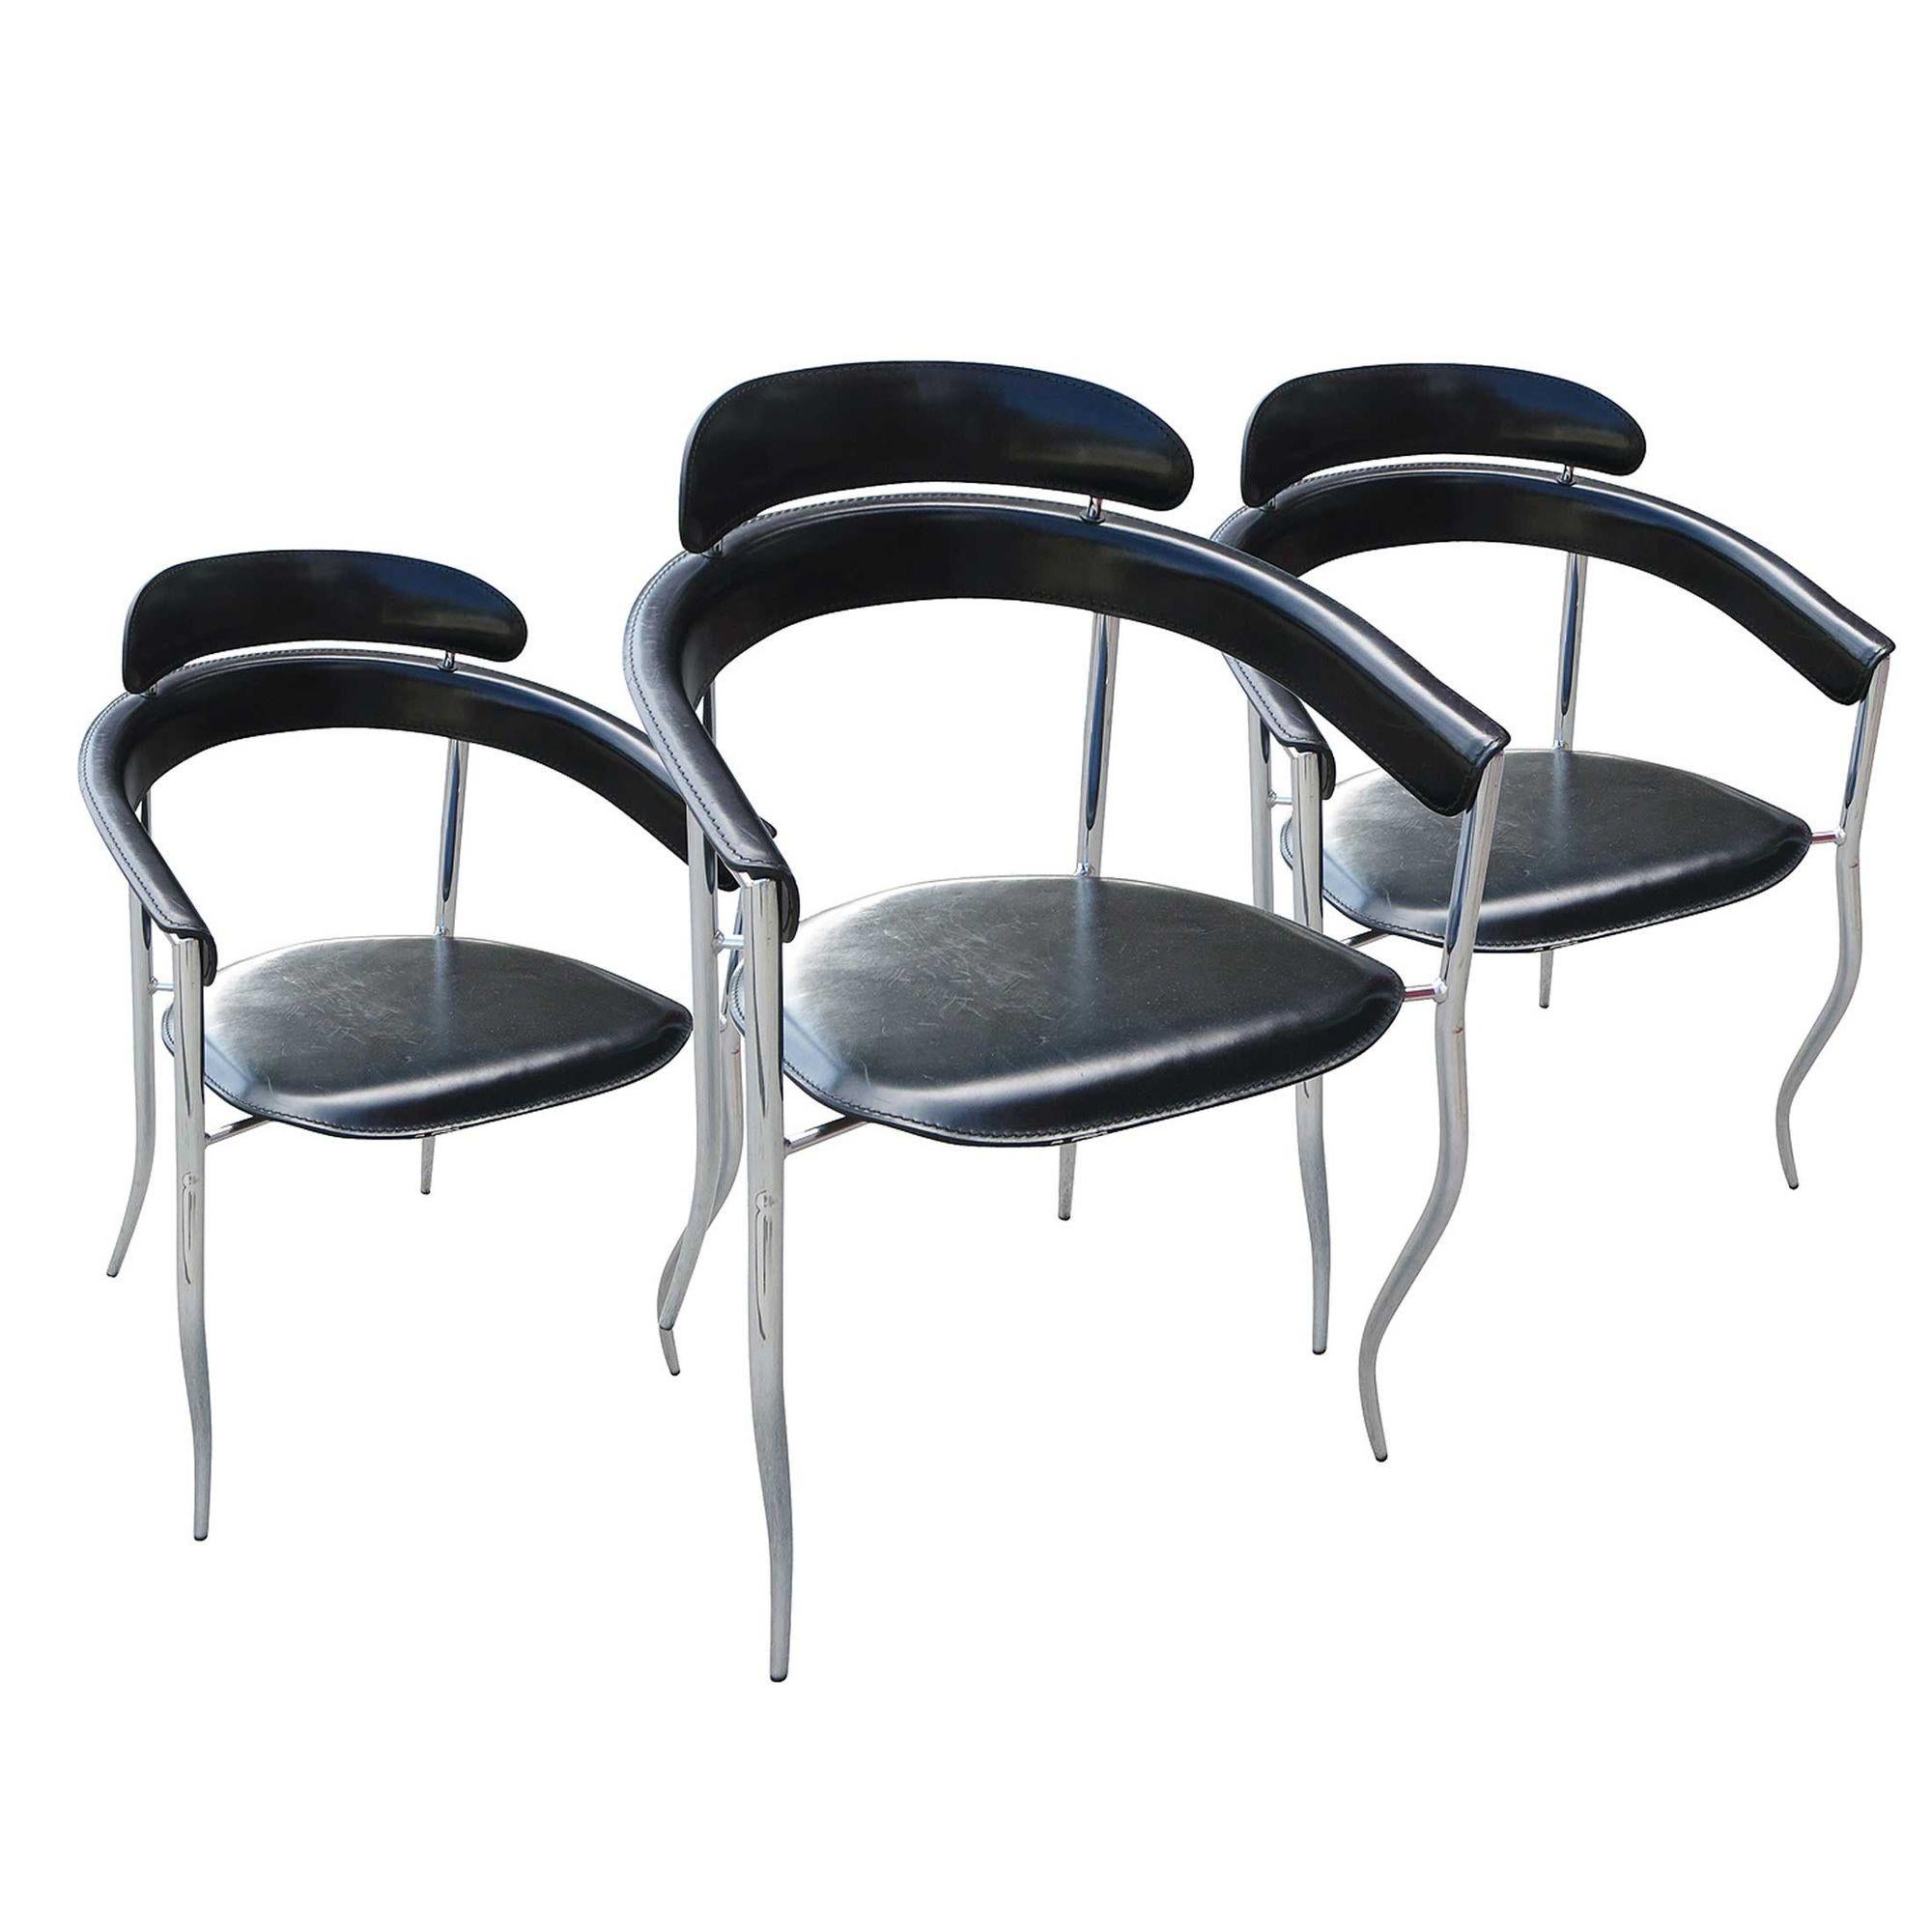 Set of four Italian Stiletto dining armchairs manufactured by Arrben furniture. These four chairs tiptoe on chrome frames supporting black leather seating, backrest, and armrests.
 
Like most stilettos, these are not made for walking but steal the